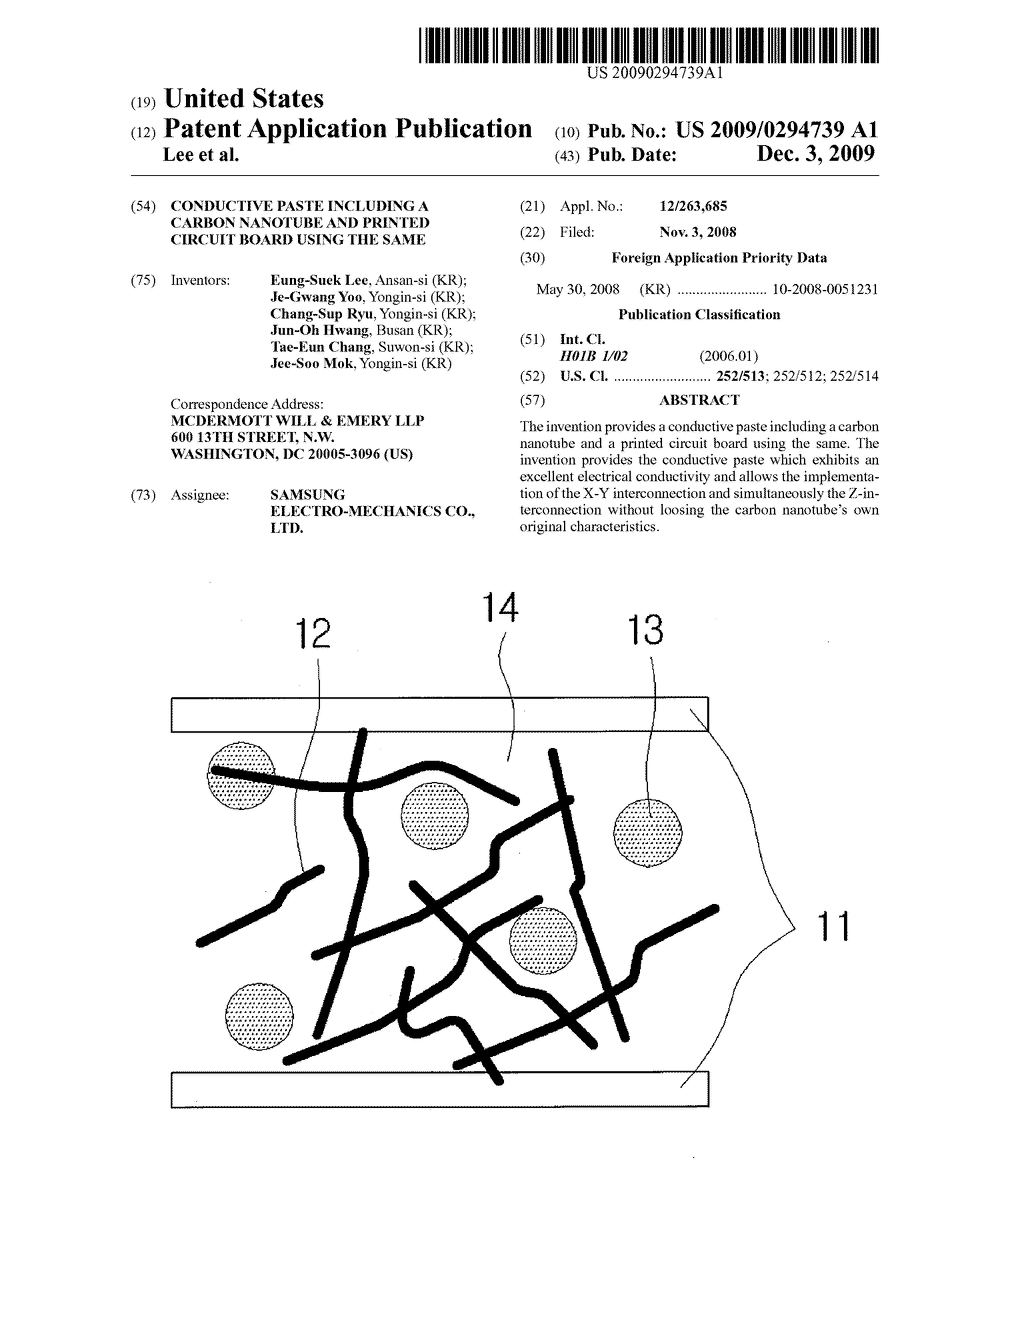 CONDUCTIVE PASTE INCLUDING A CARBON NANOTUBE AND PRINTED CIRCUIT BOARD USING THE SAME - diagram, schematic, and image 01